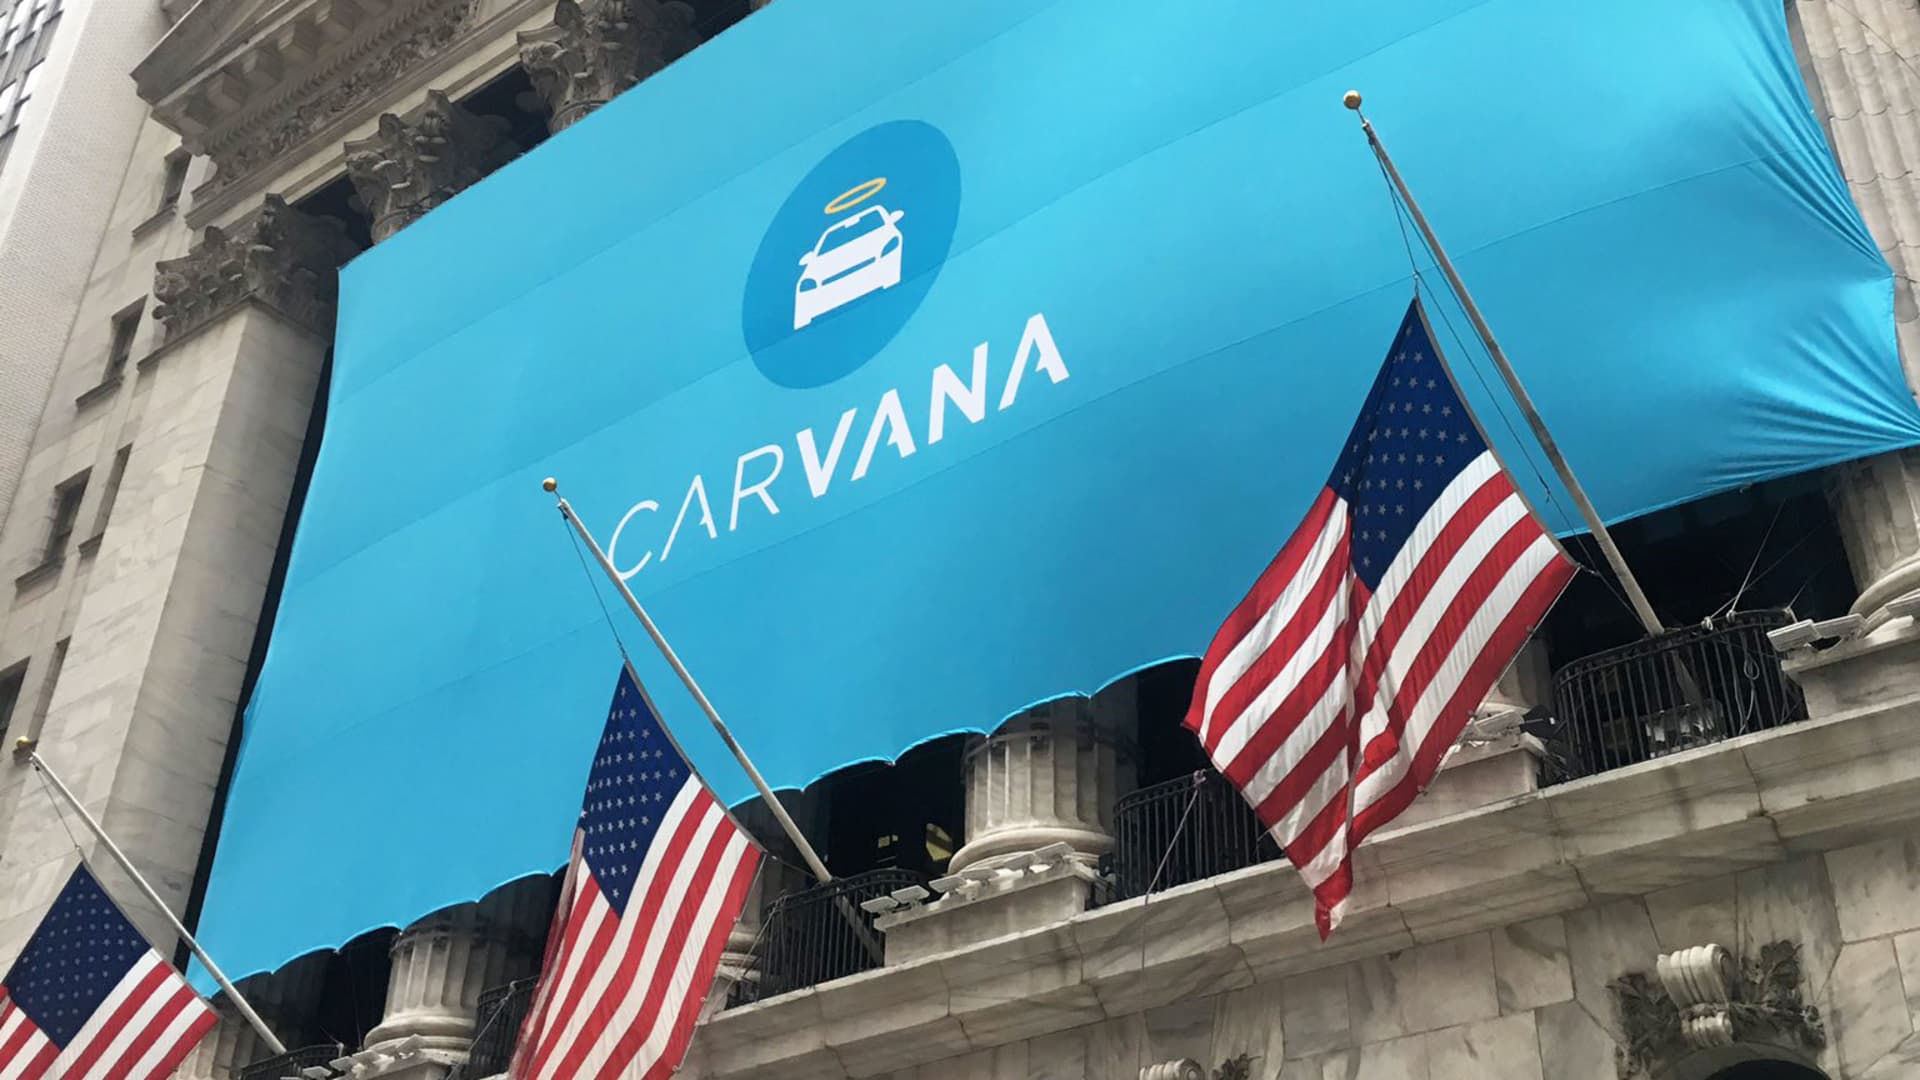 Carvana inventory posts worst day ever as outlook darkens for used car market